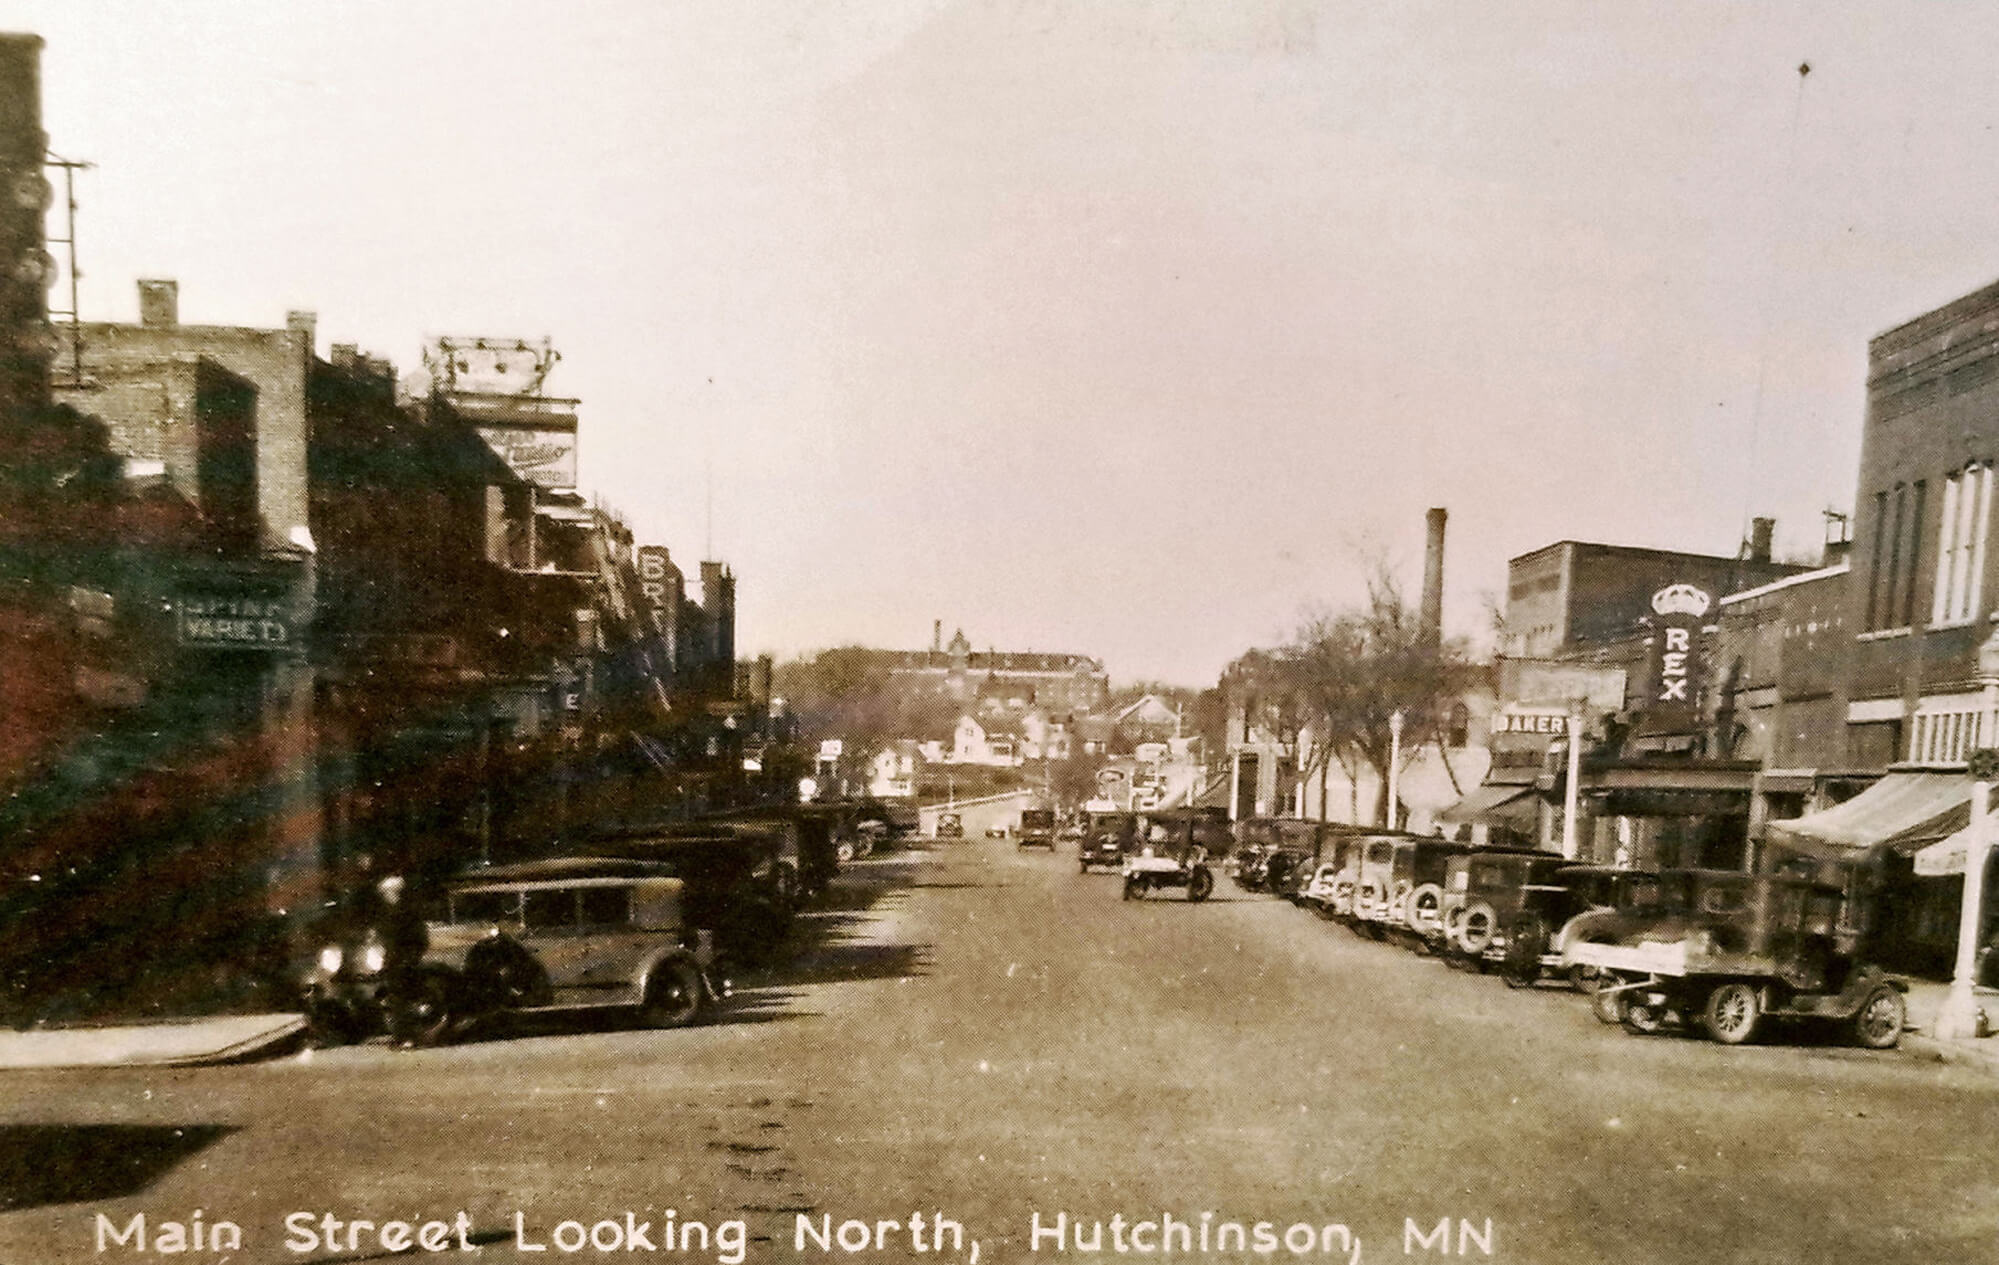 A historic photo of downtown Hutchinson